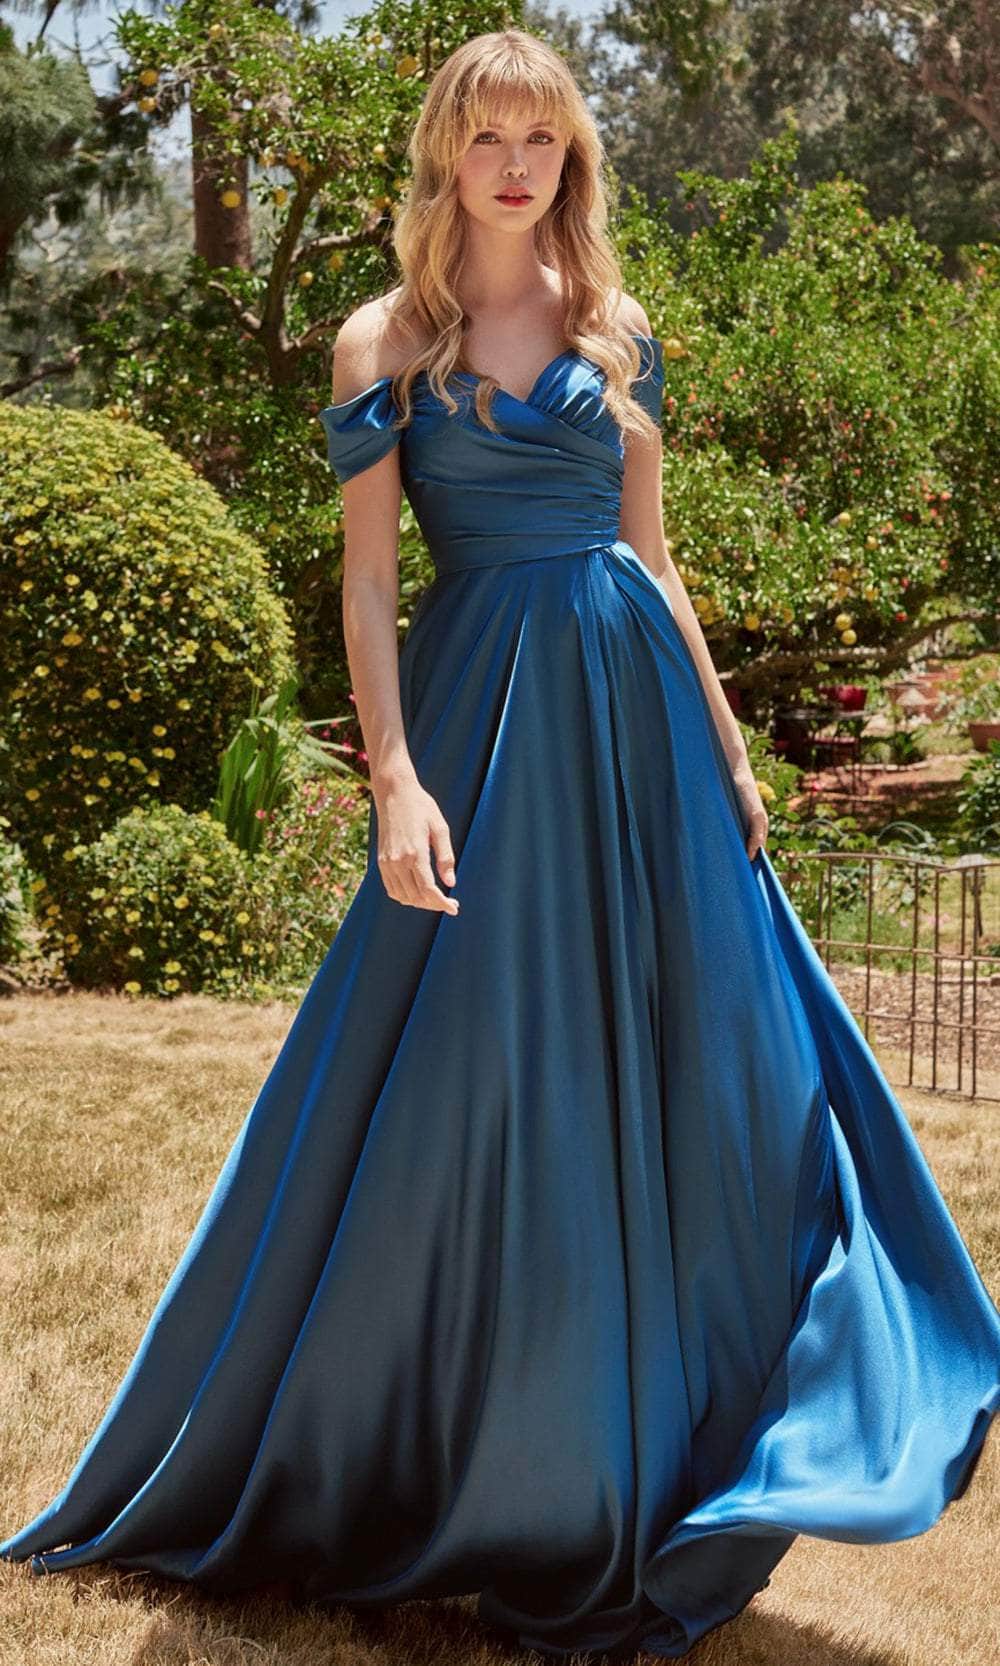 Ladivine 7493 - Sweetheart Satin Evening Gown Evening Dresses 2 / French Navy